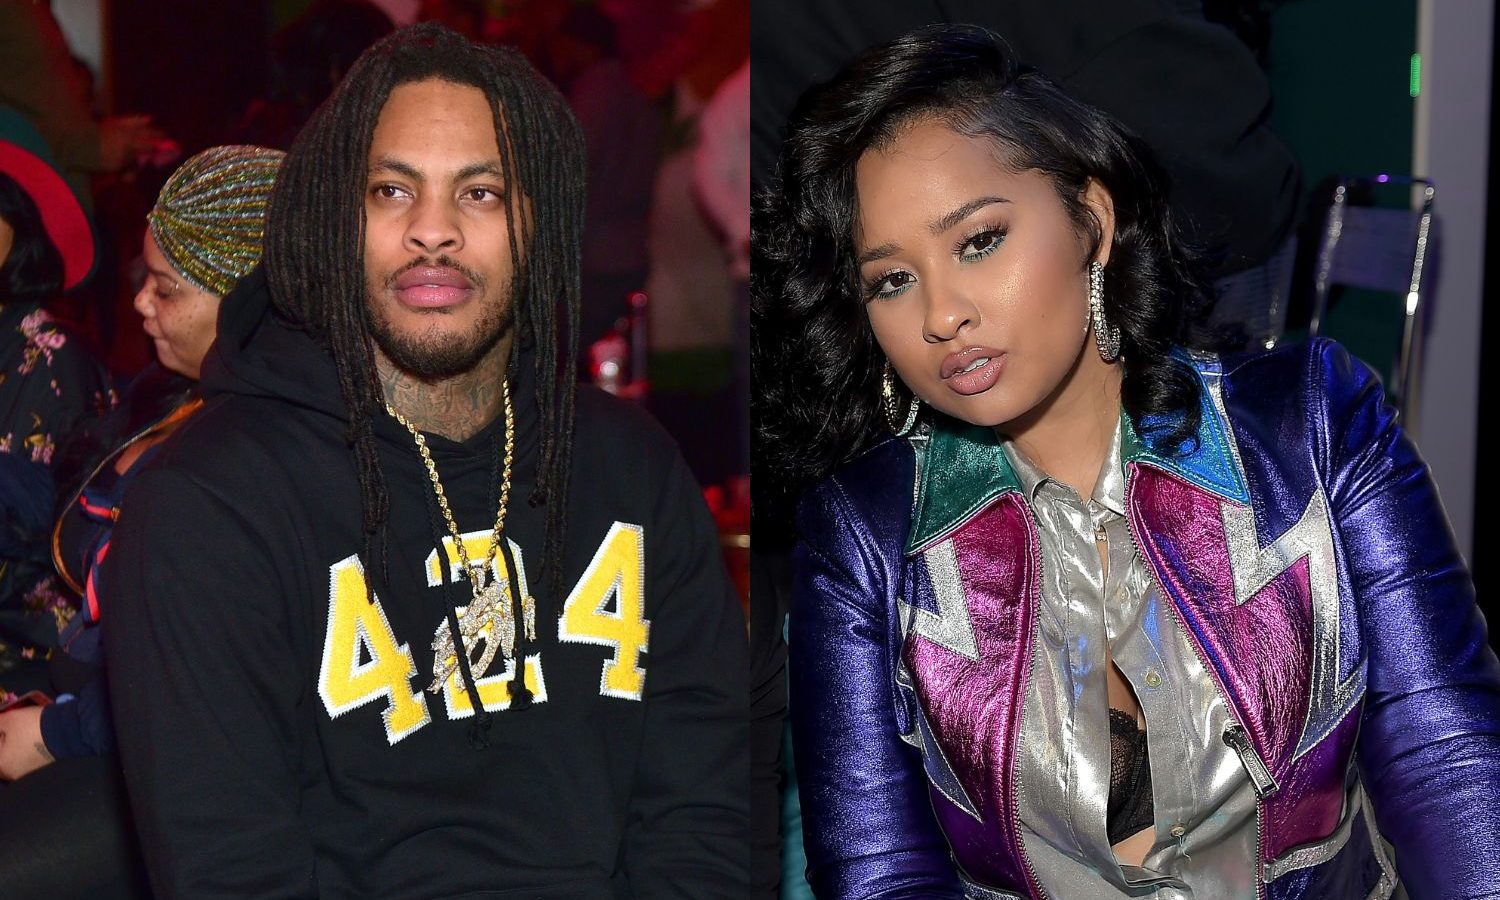 Tit For Tat?! Waka Flocka Shares His Tattoo Cover-Up Of Tammy Rivera’s Name After She Flexed Her Cover-Up Of His thumbnail